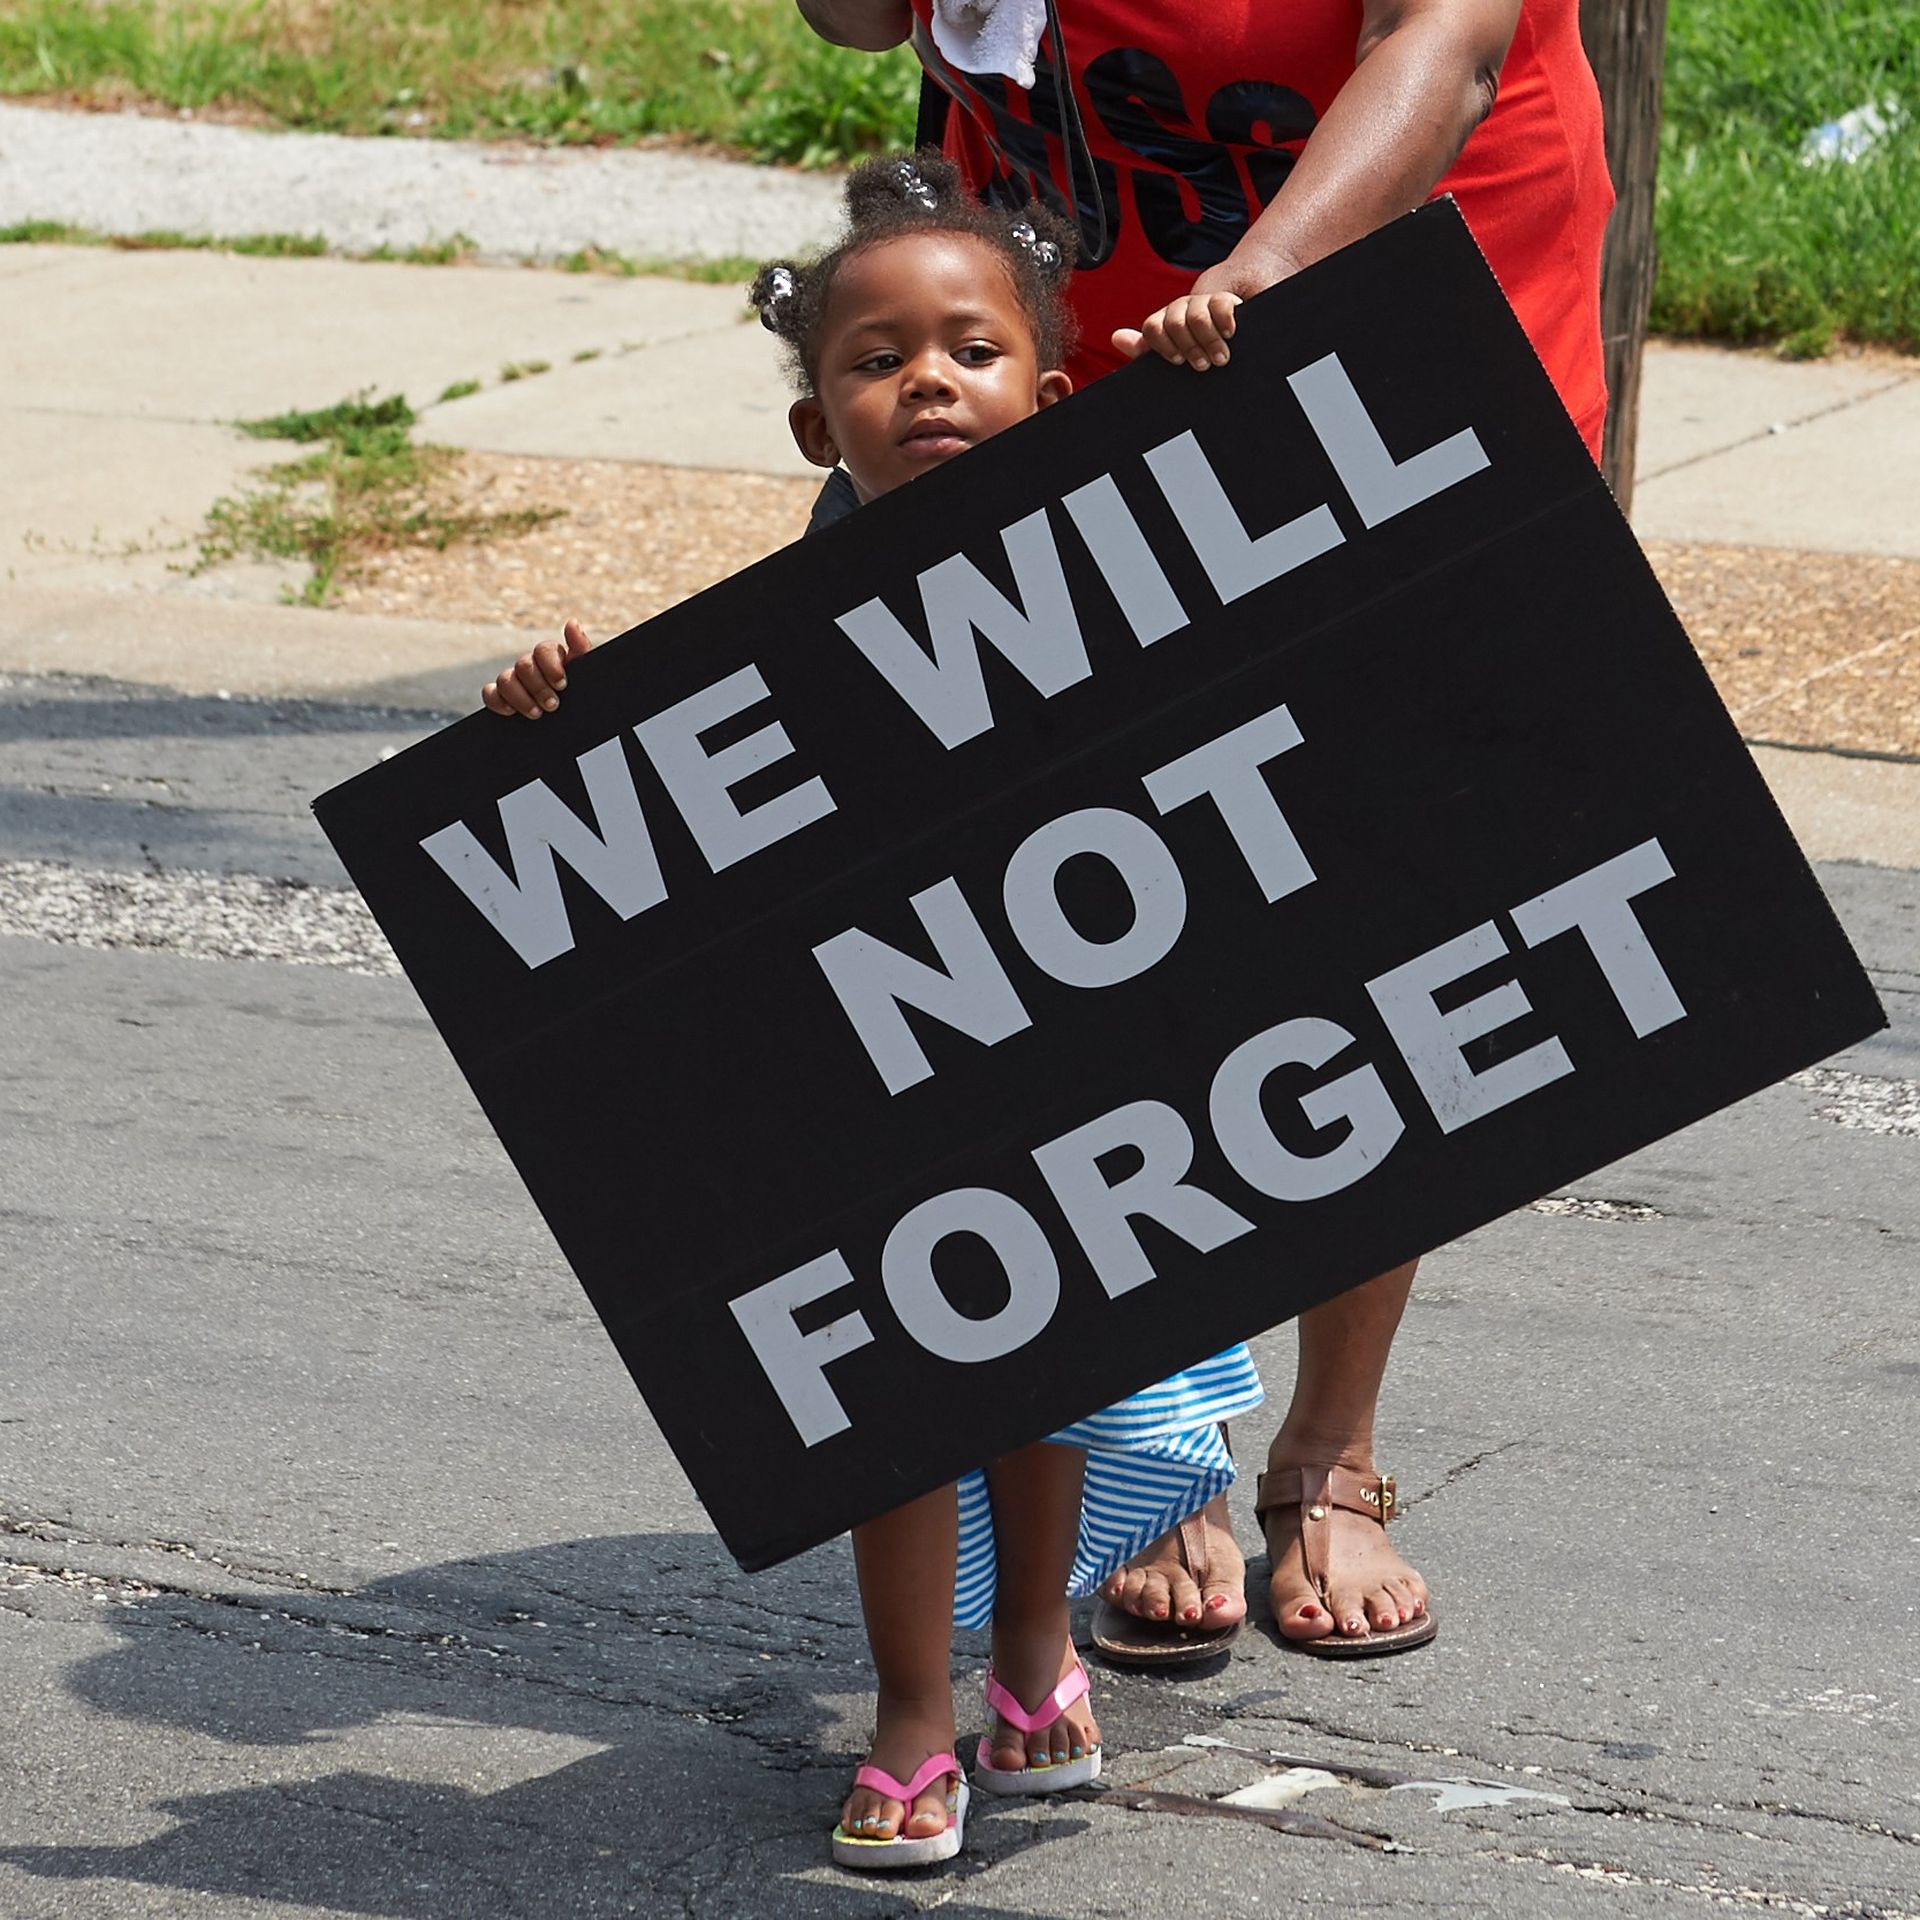 A young girl holds a sign on August 8, 2015 in Ferguson, Missouri. As the embattled community celebrates the one-year anniversary of the shooting of Michael Brown Jr. by a Ferguson police officer.